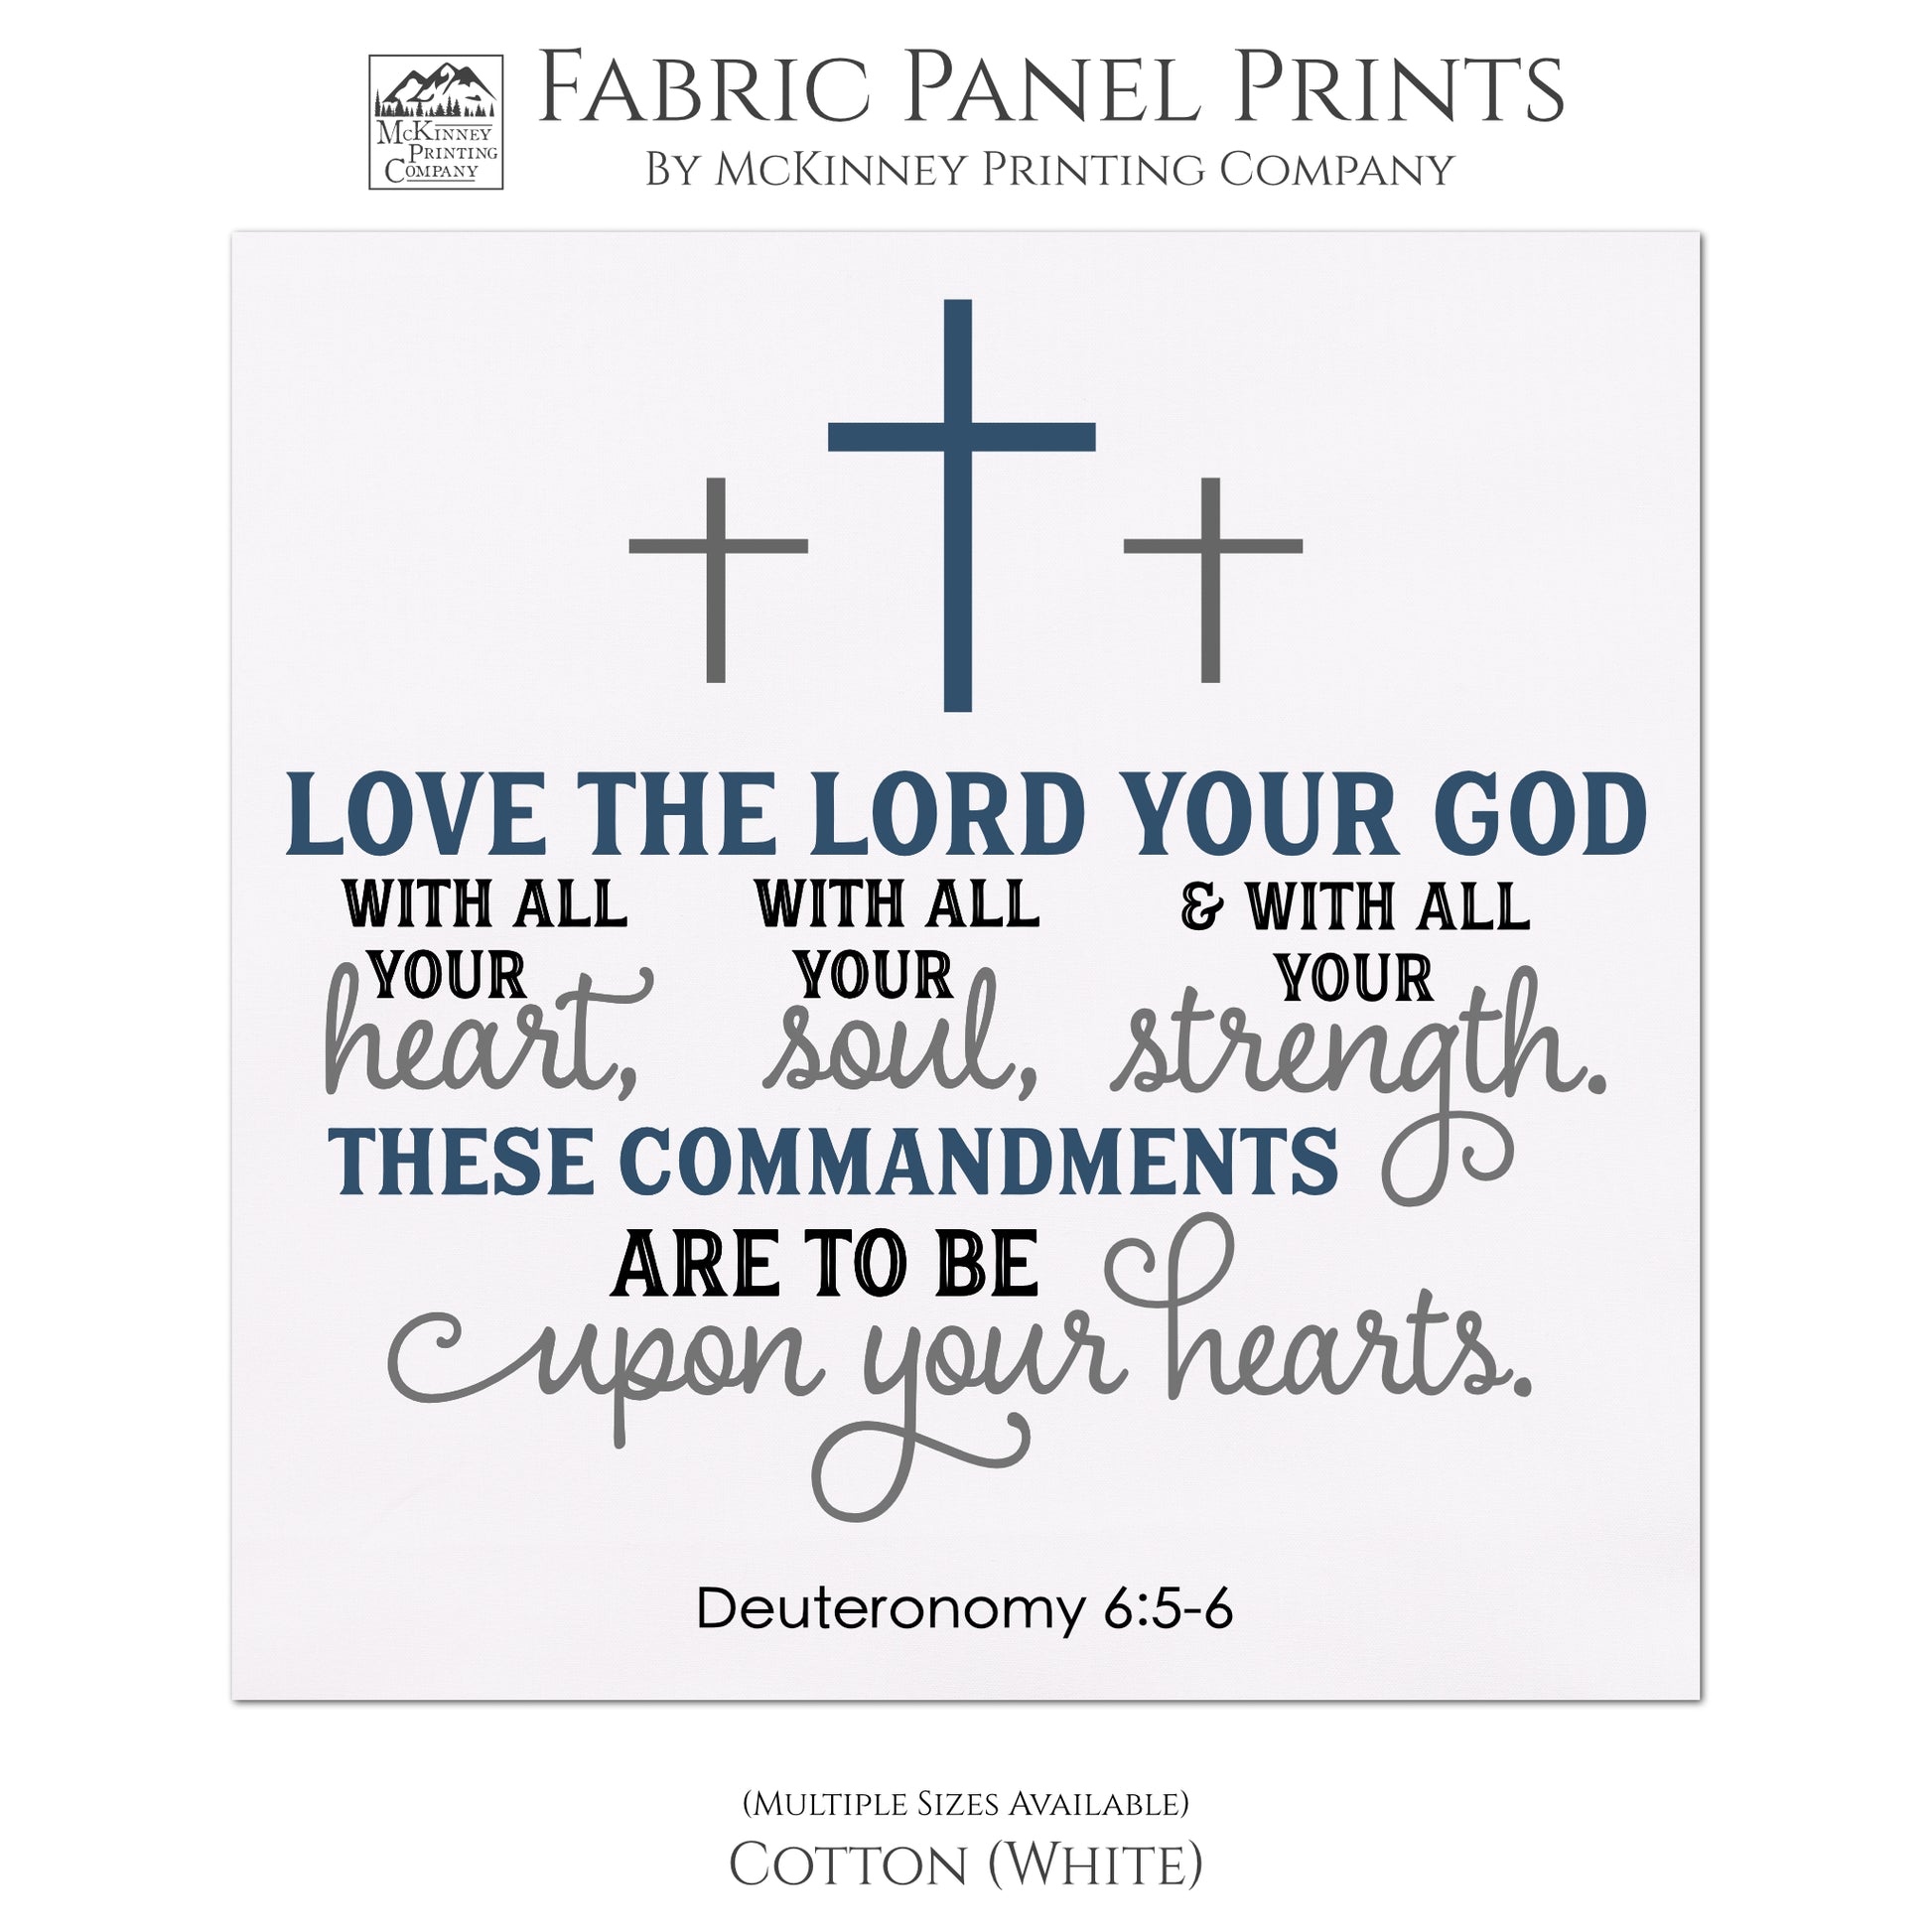 Deuteronomy 6:5 - 6, Love the Lord Your God, Scripture Fabric, Wall Art, Decor, Sewing, Materials, Craft -  Cotton, White